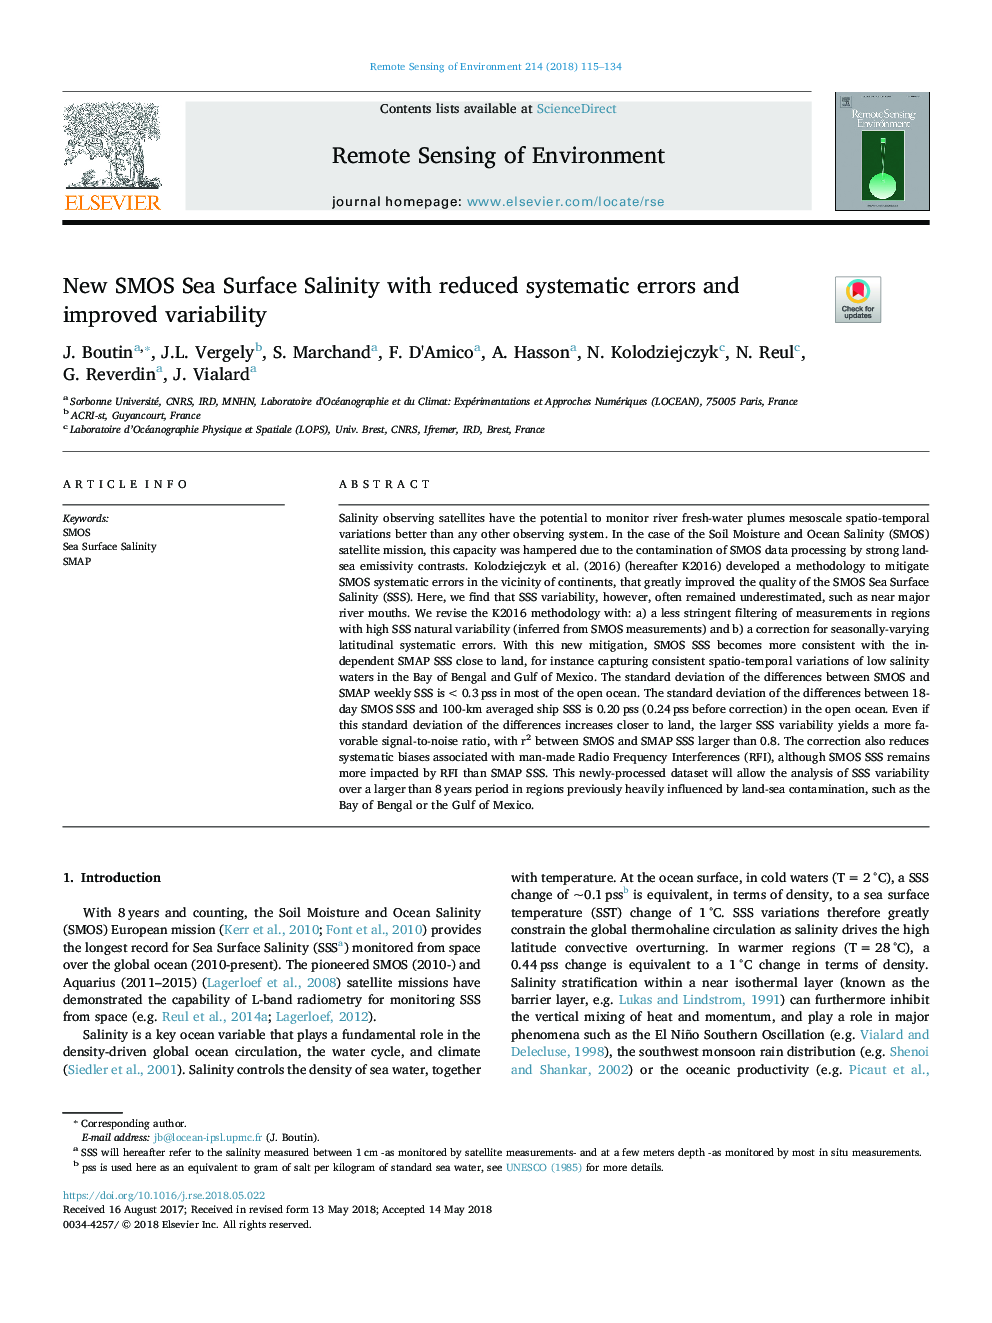 New SMOS Sea Surface Salinity with reduced systematic errors and improved variability